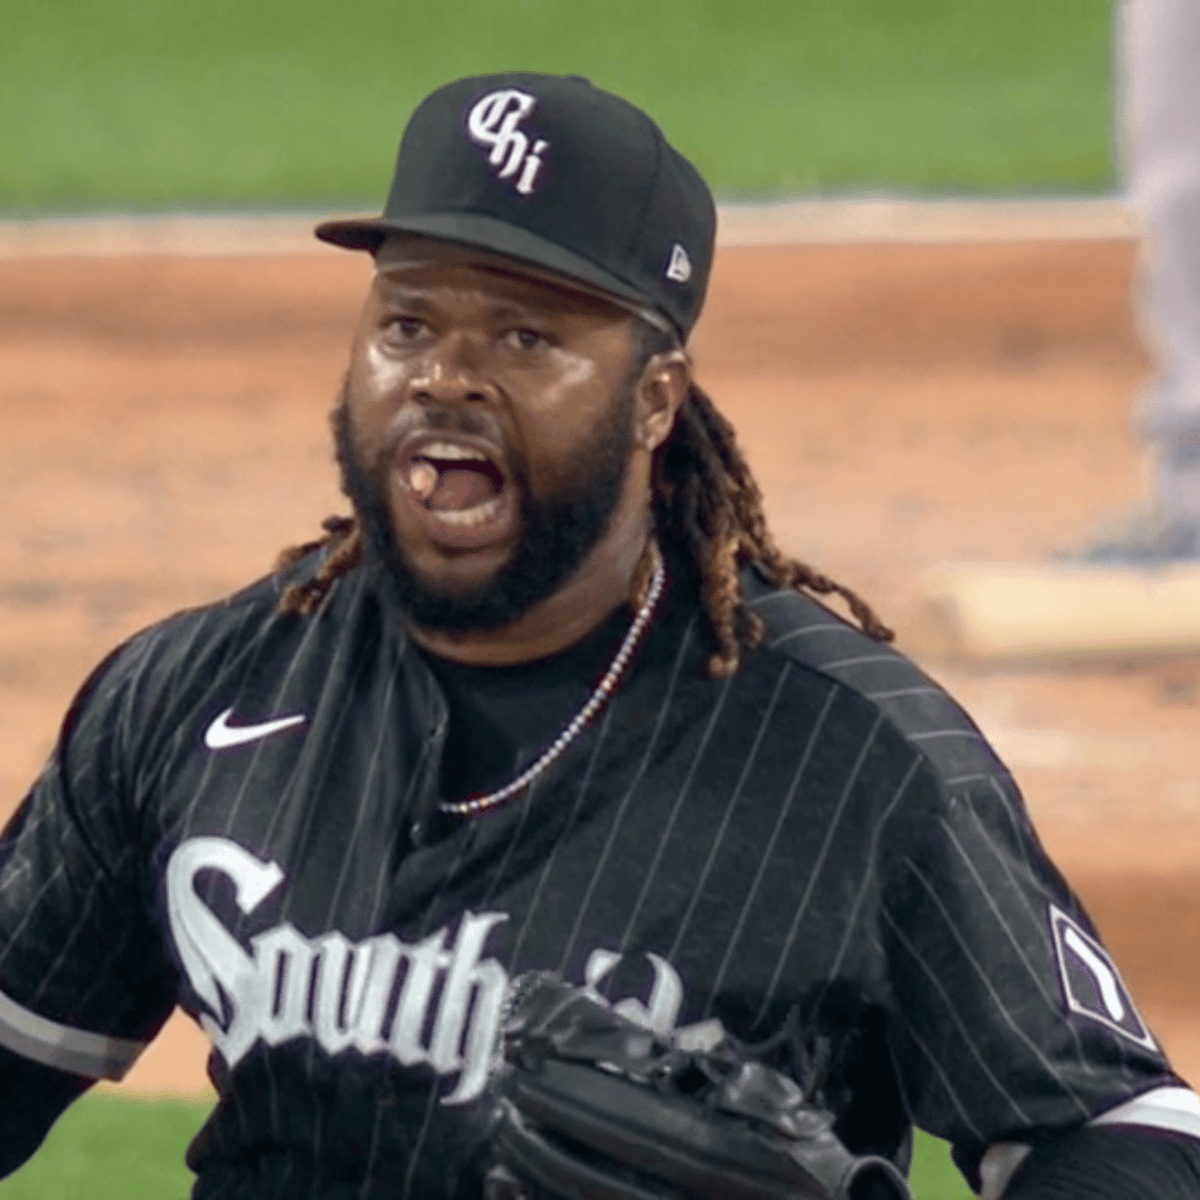 White Sox' Johnny Cueto named AL Player of the Week – NBC Sports Chicago